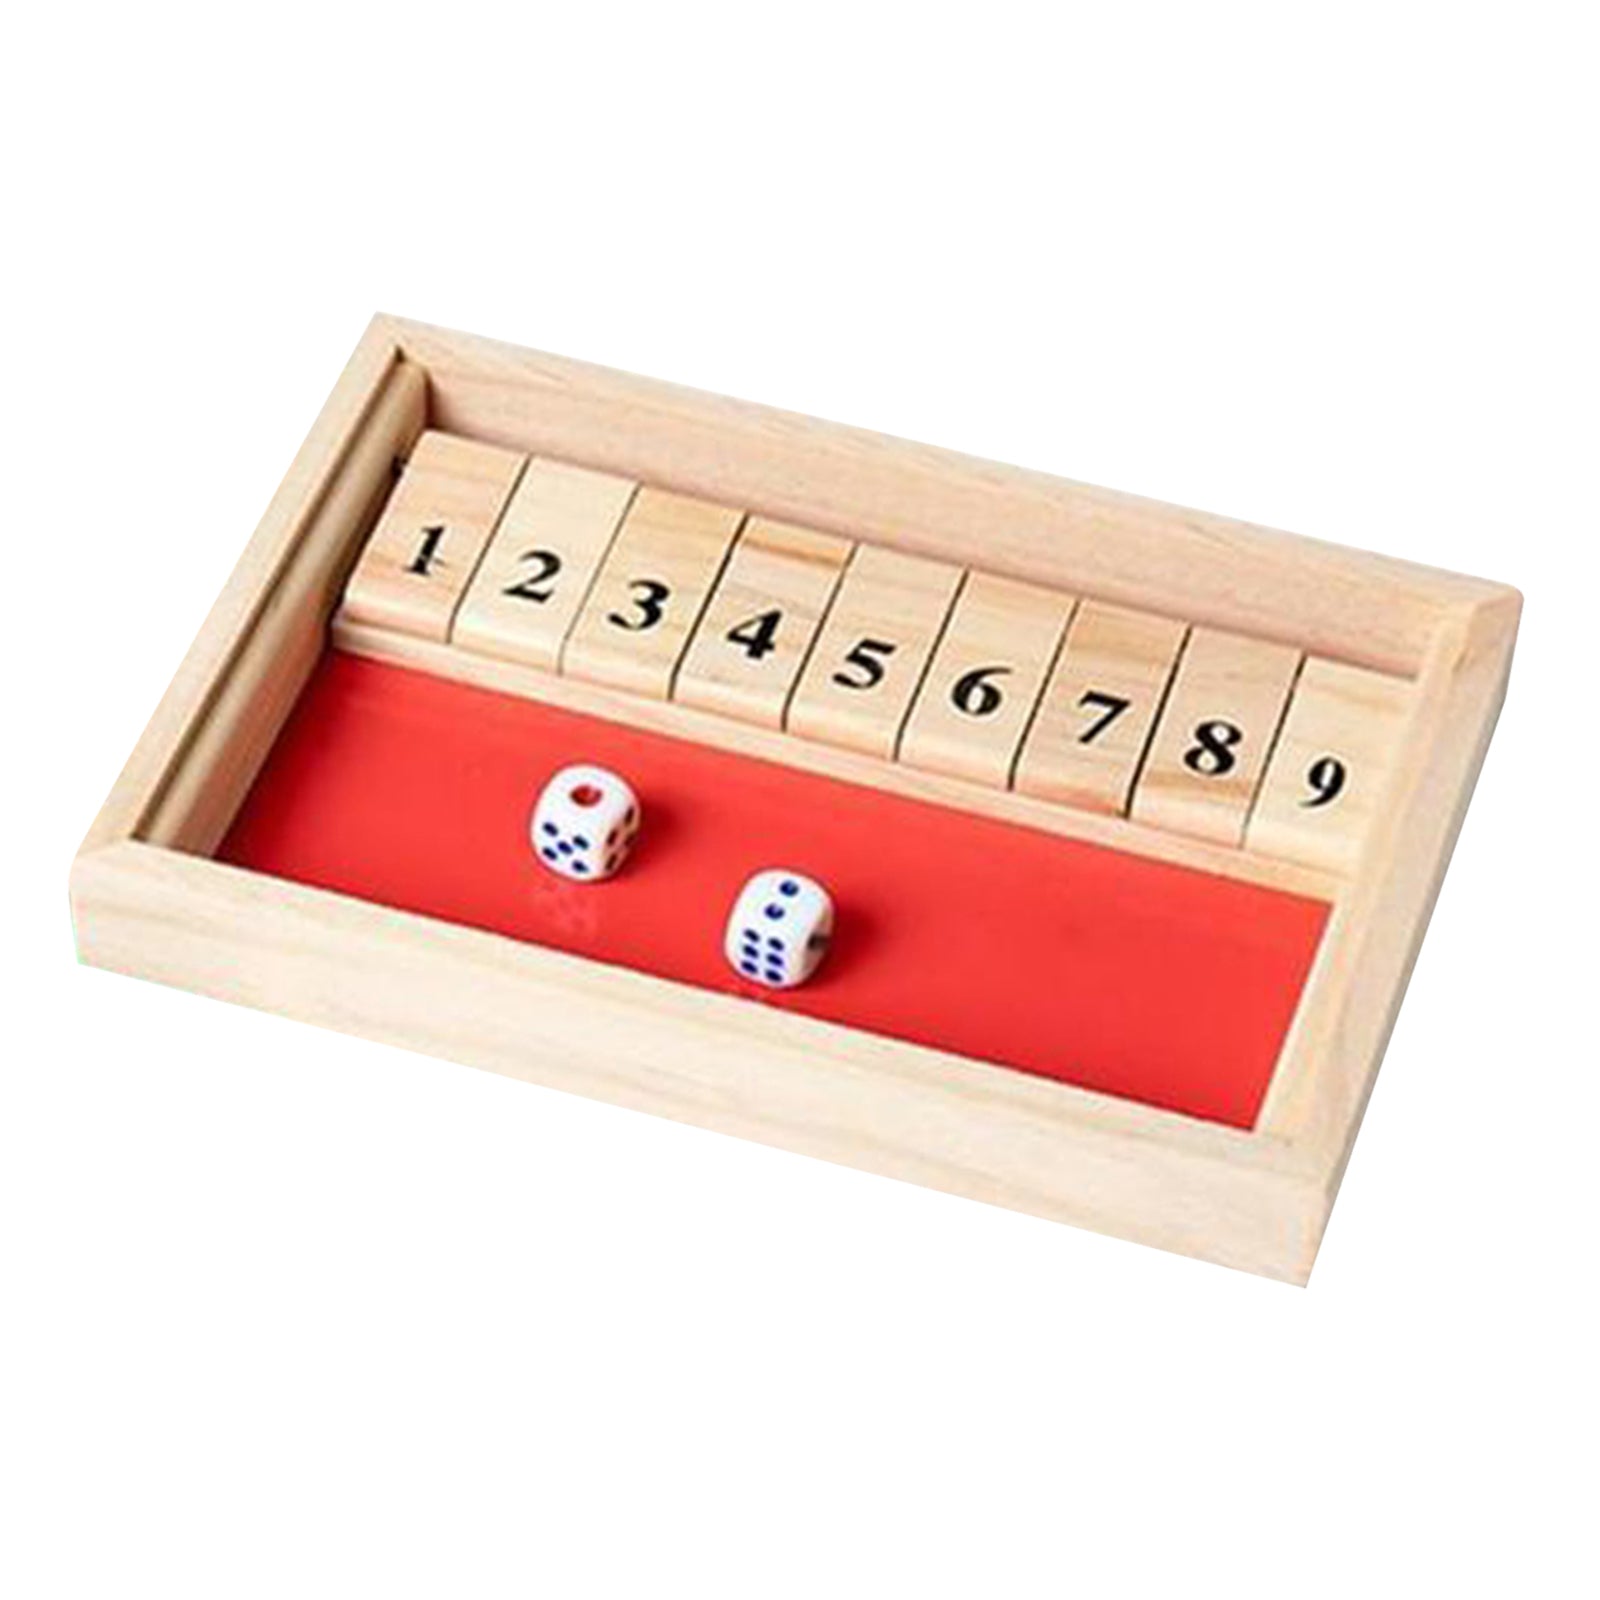 9 Numbers Shut The Box Board Game w/Dice for Bar Drinking Party Family Games